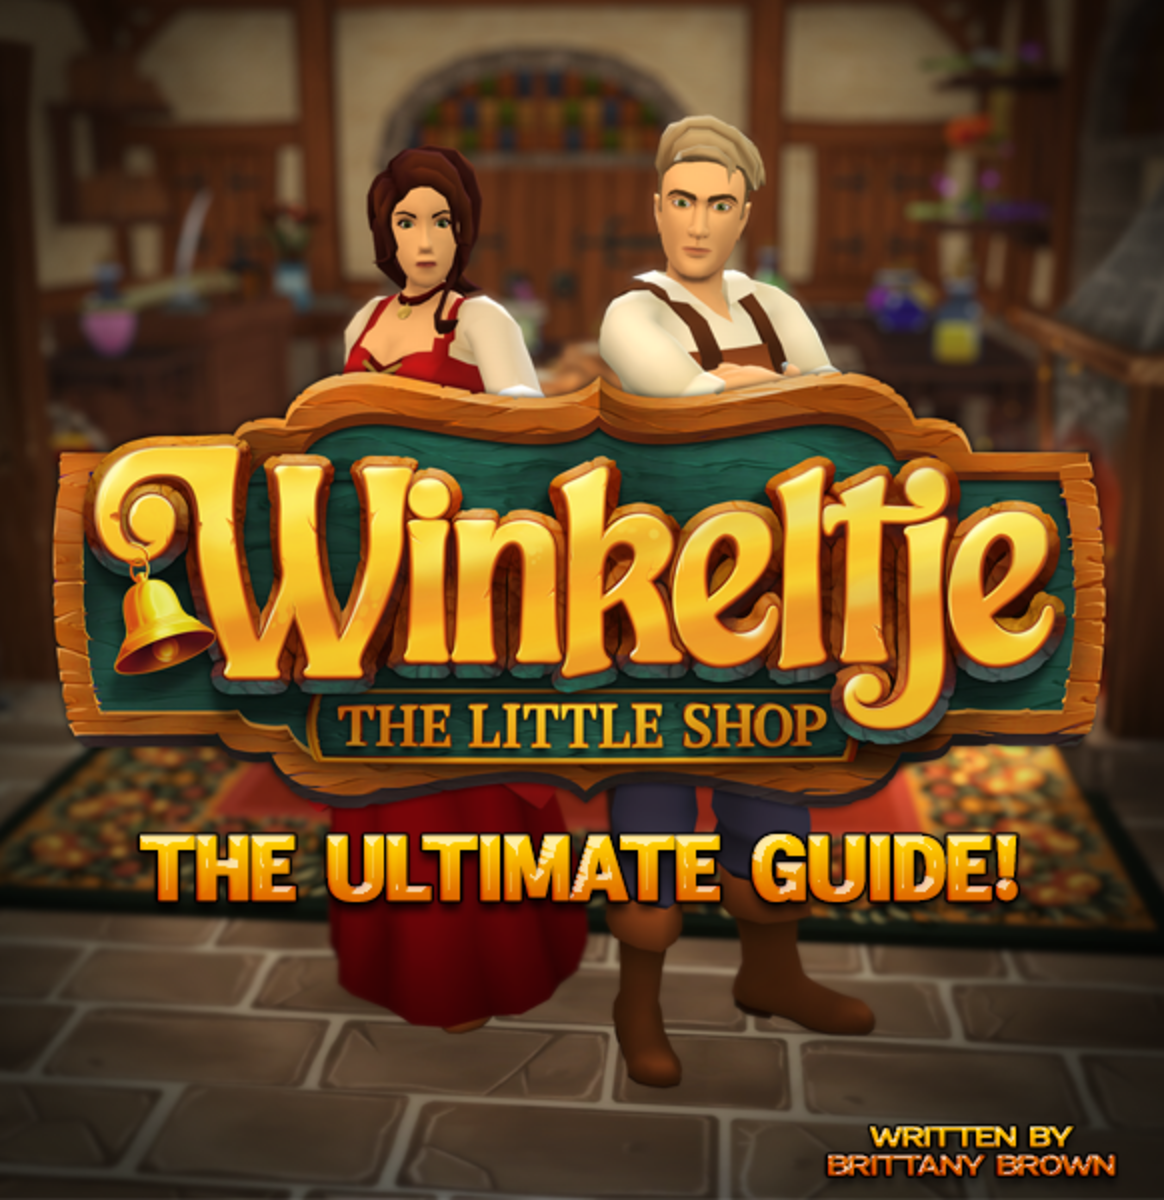 The ultimate guide to "Winkeltje: The Little Shop": tips, tricks, and all you need to know to win the game!